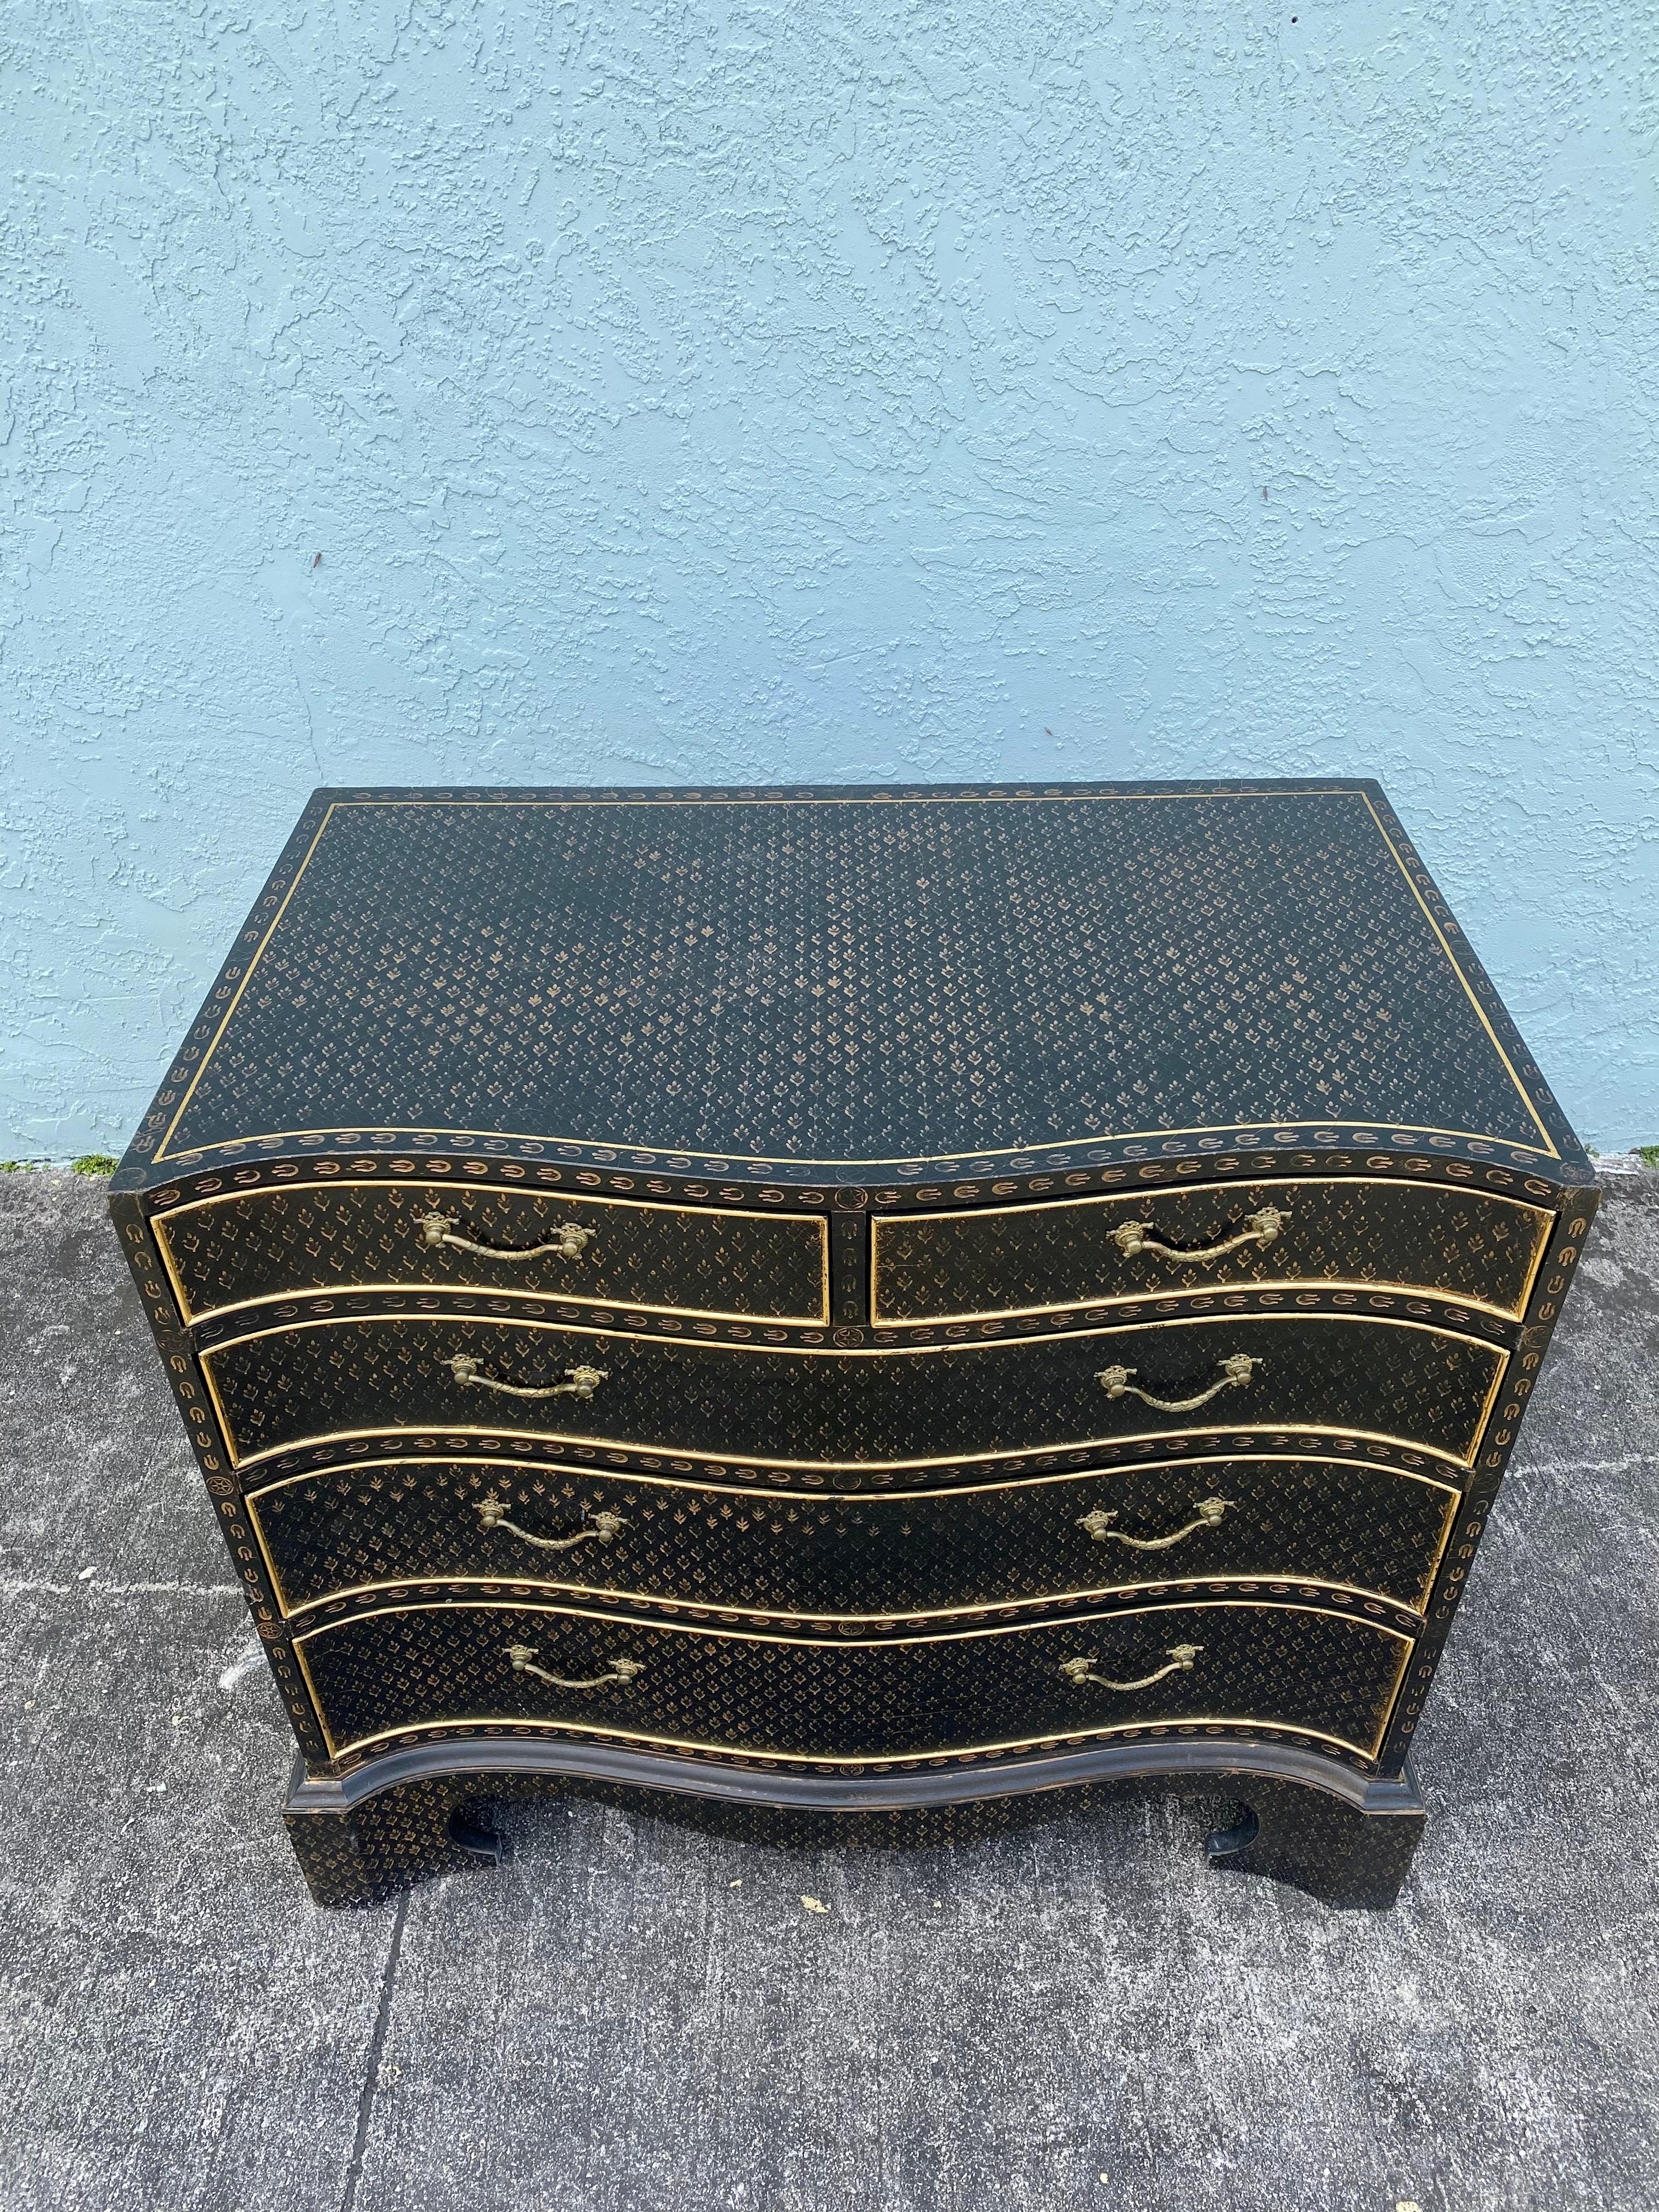 American Serpentine Ebonized  Bronze Paint Imprinted Leather Wrapped Commode Dresser  For Sale